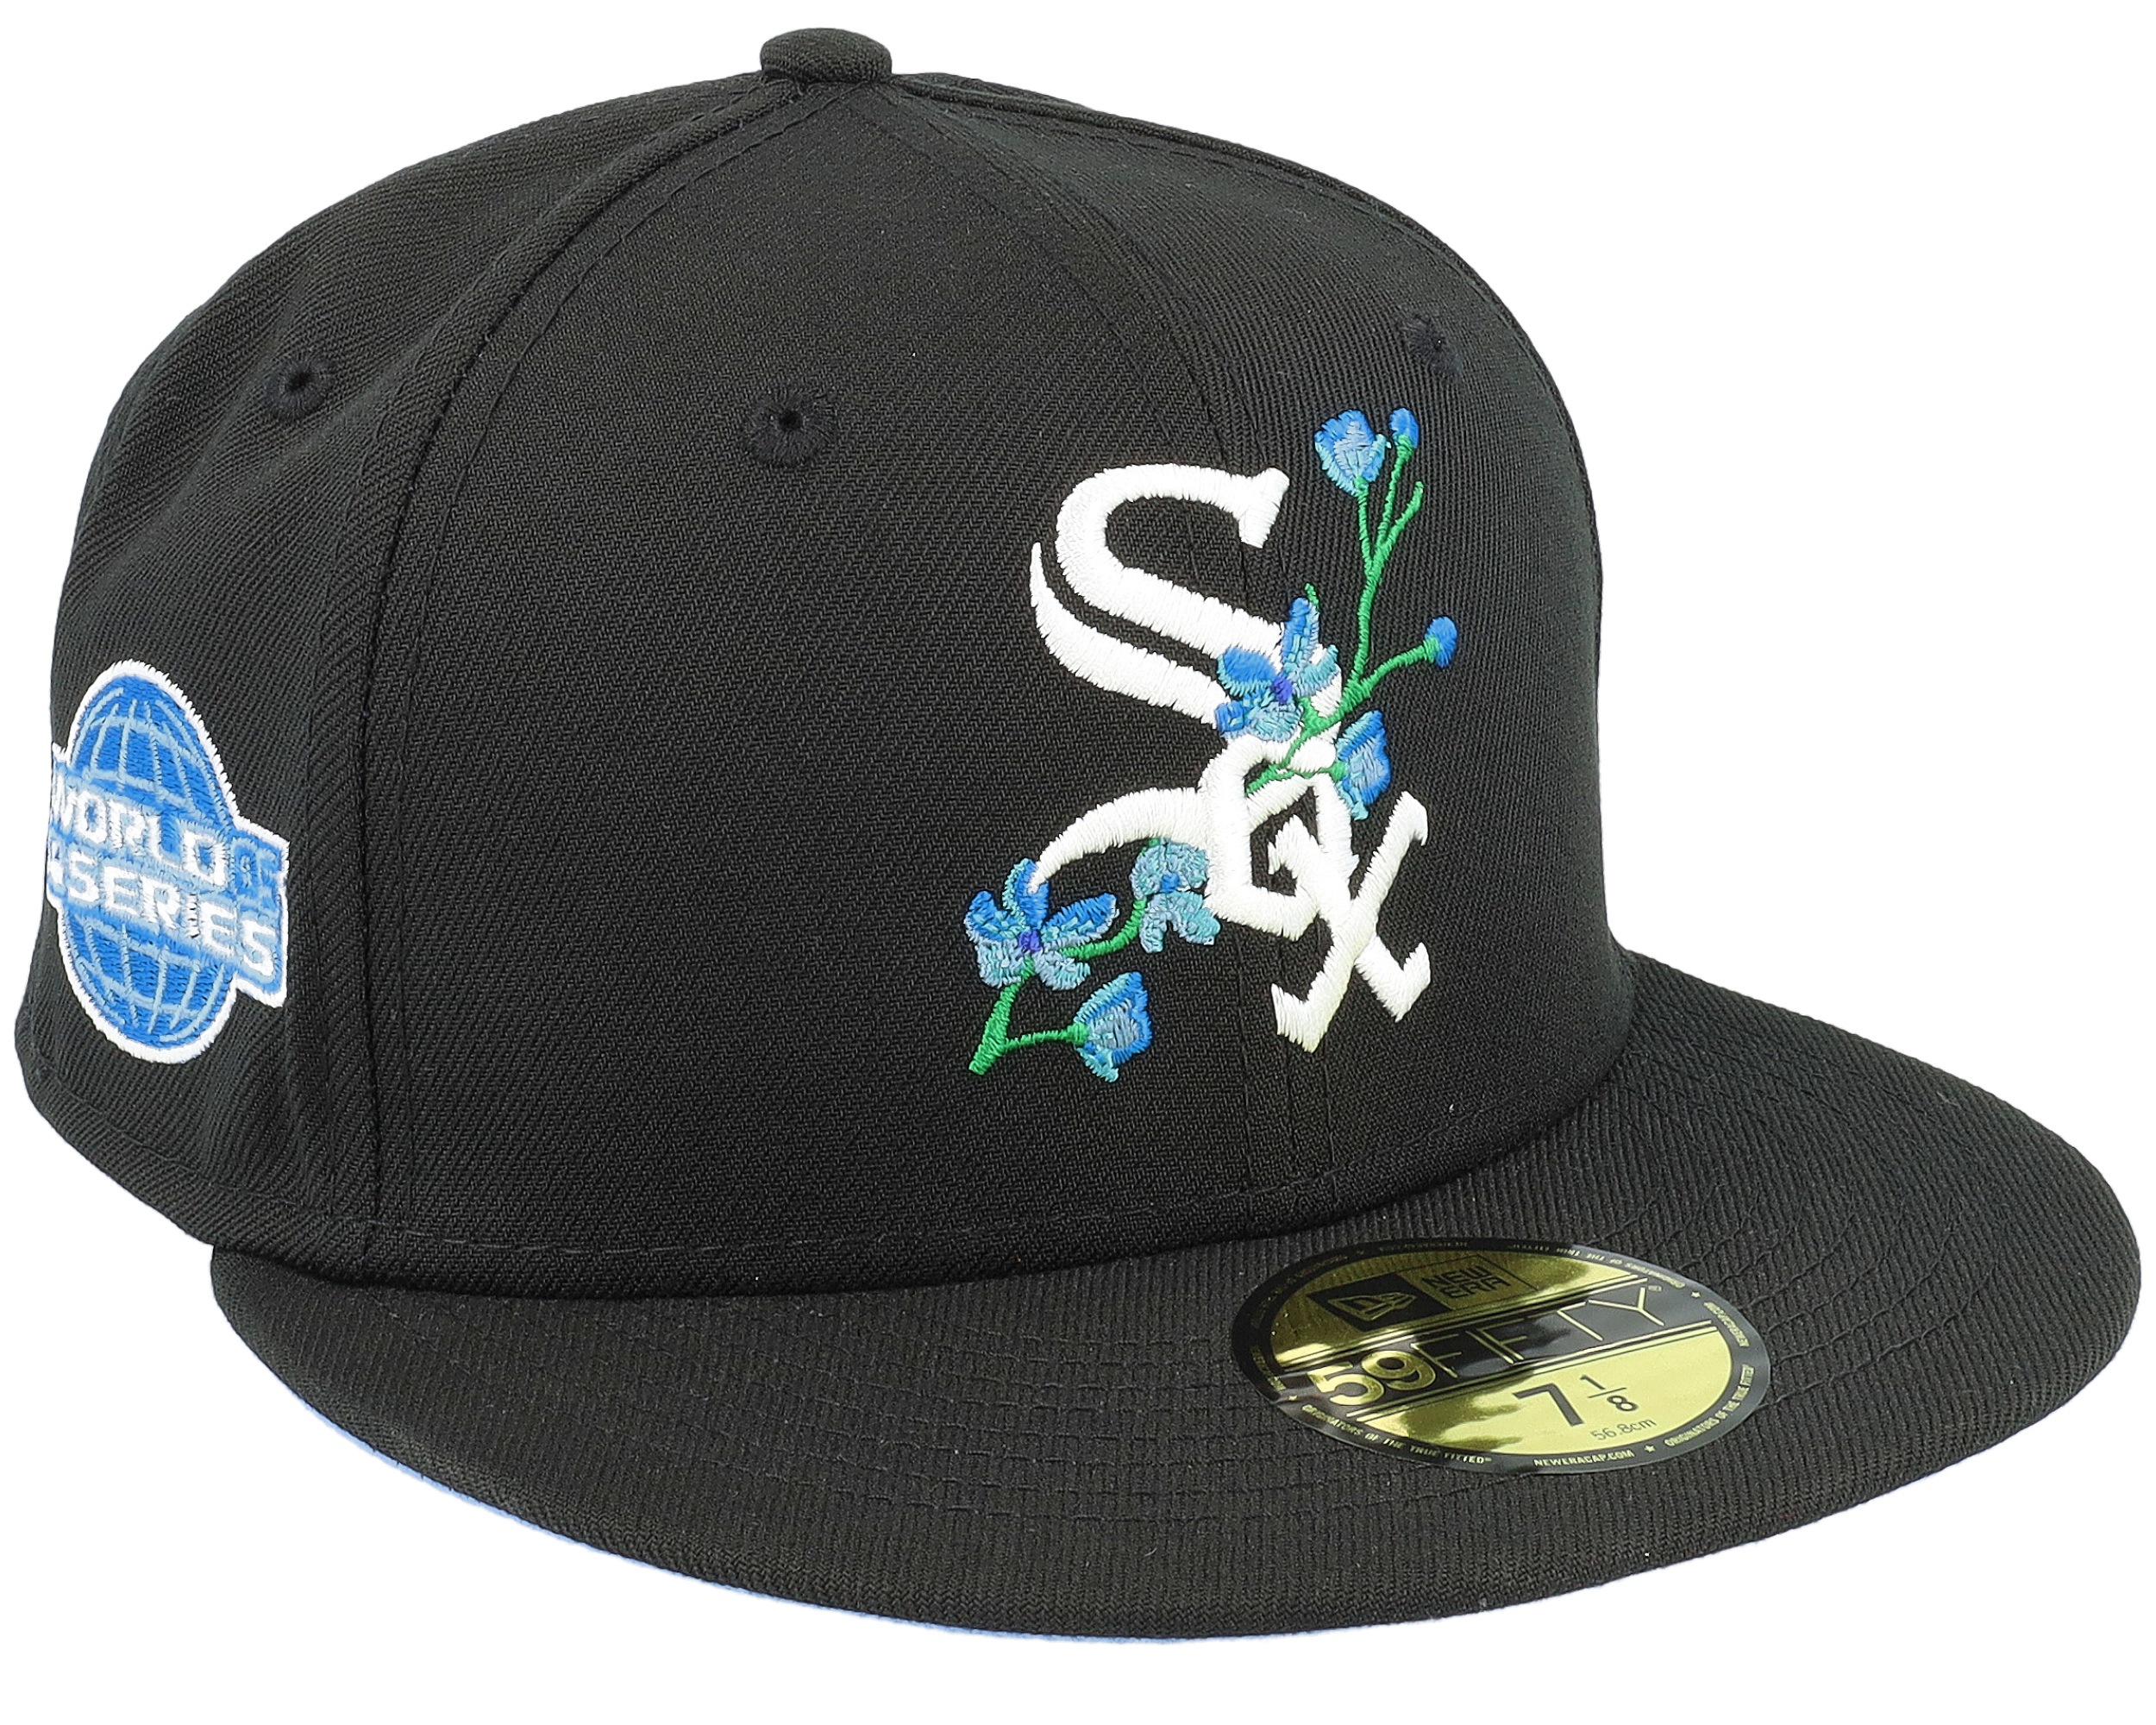 Chicago White Sox 59FIFTY Sidepatchbloom Black Fitted - New Era Cap ...